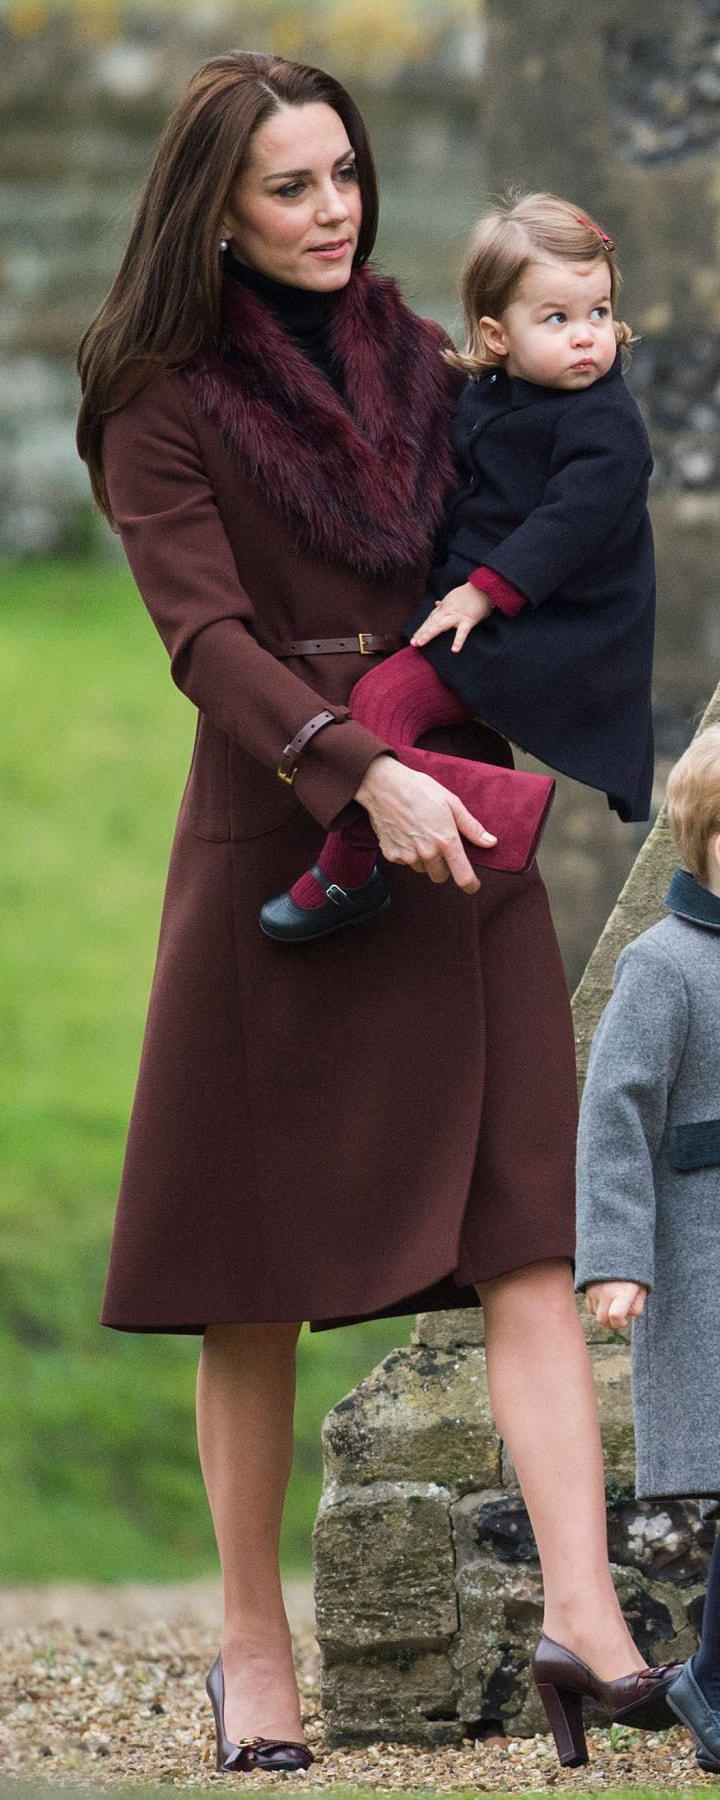 ASOS Faux Fur Collar in Burgundy as seen on Kate Middleton, The Duchess of Cambridge.